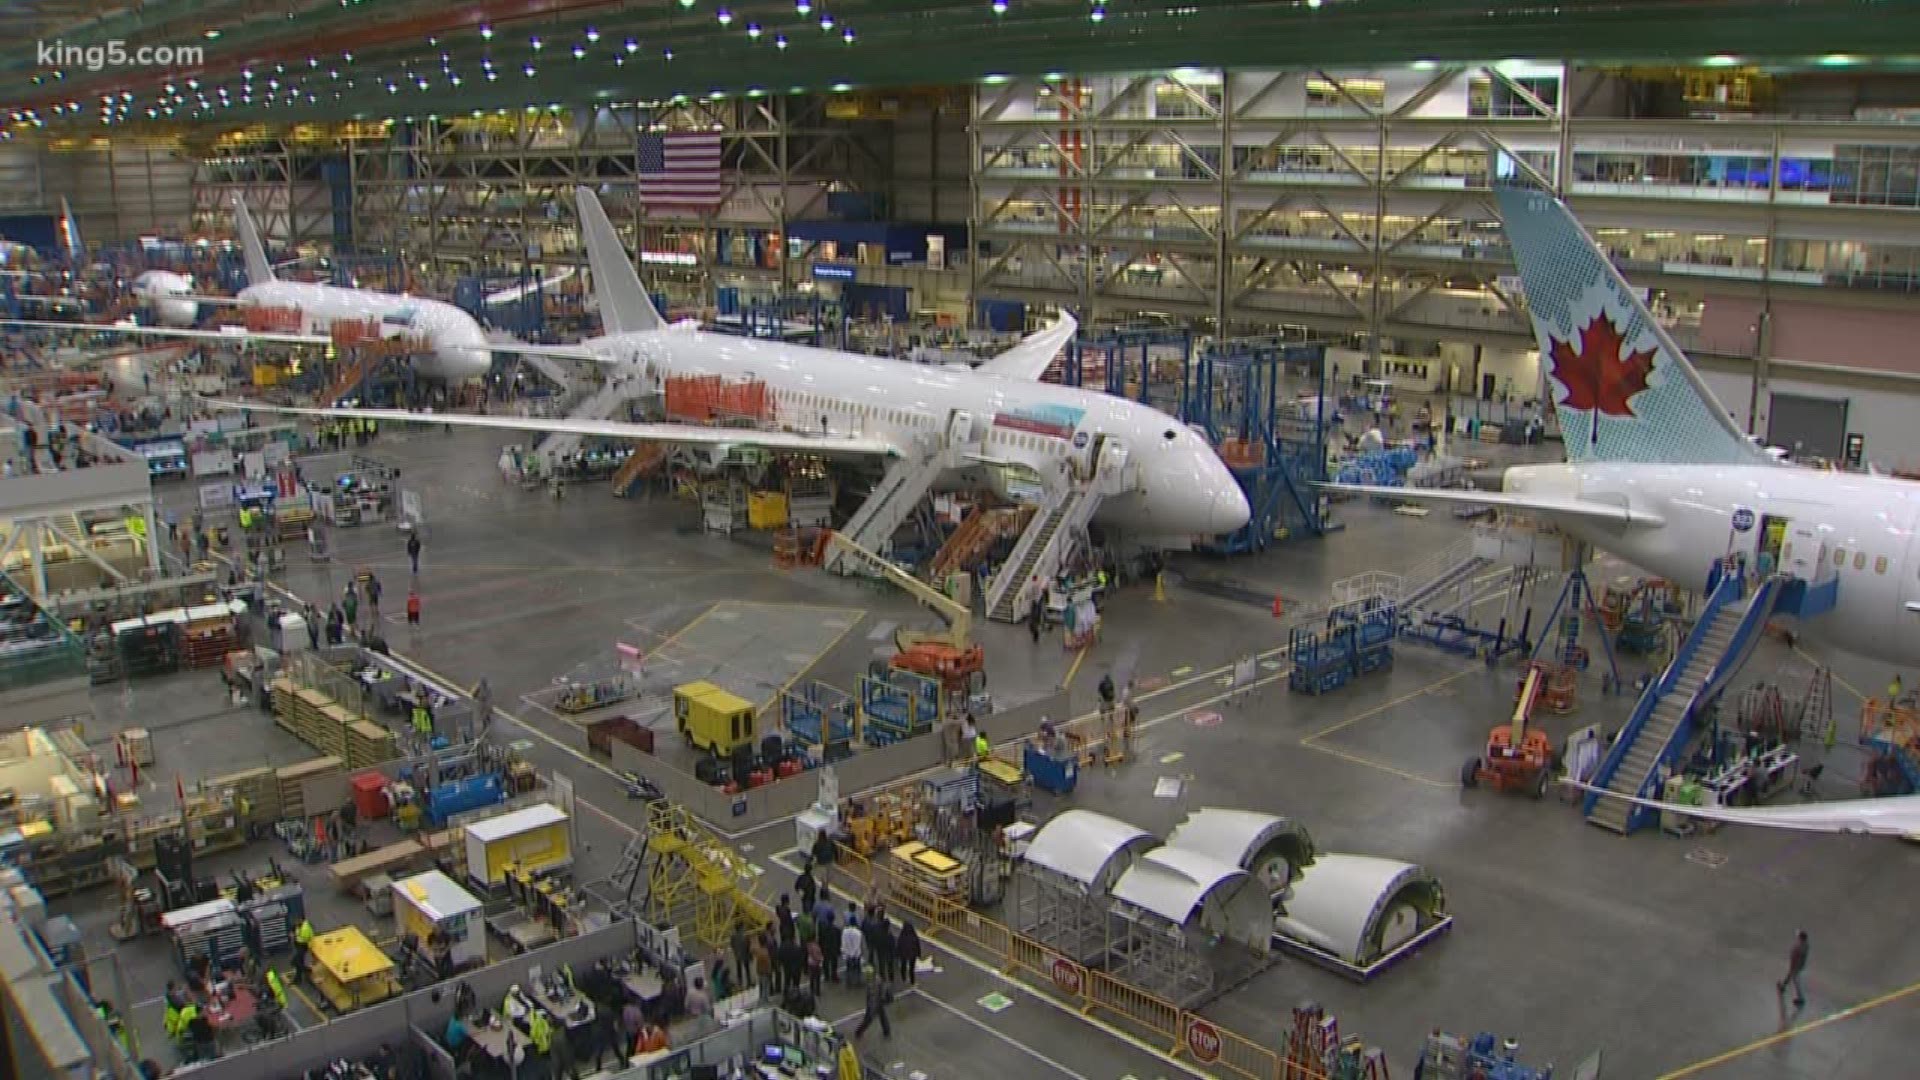 Handwashing stations and cleaning are just some of the precautions Boeing is taking, but fear remains as work continues at the Everett plant.